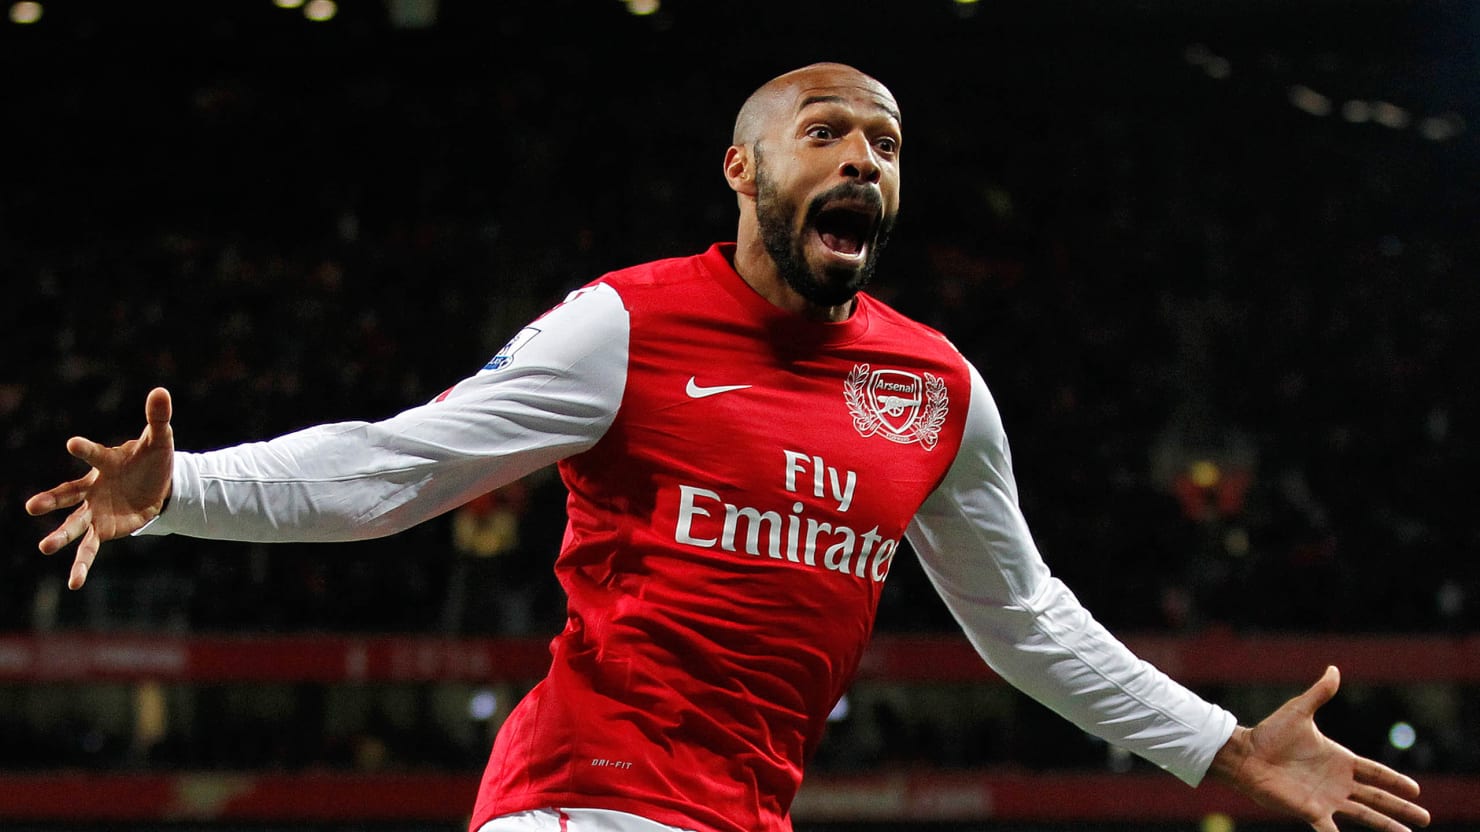 Soccer Legend Thierry Henry Retires1480 x 832